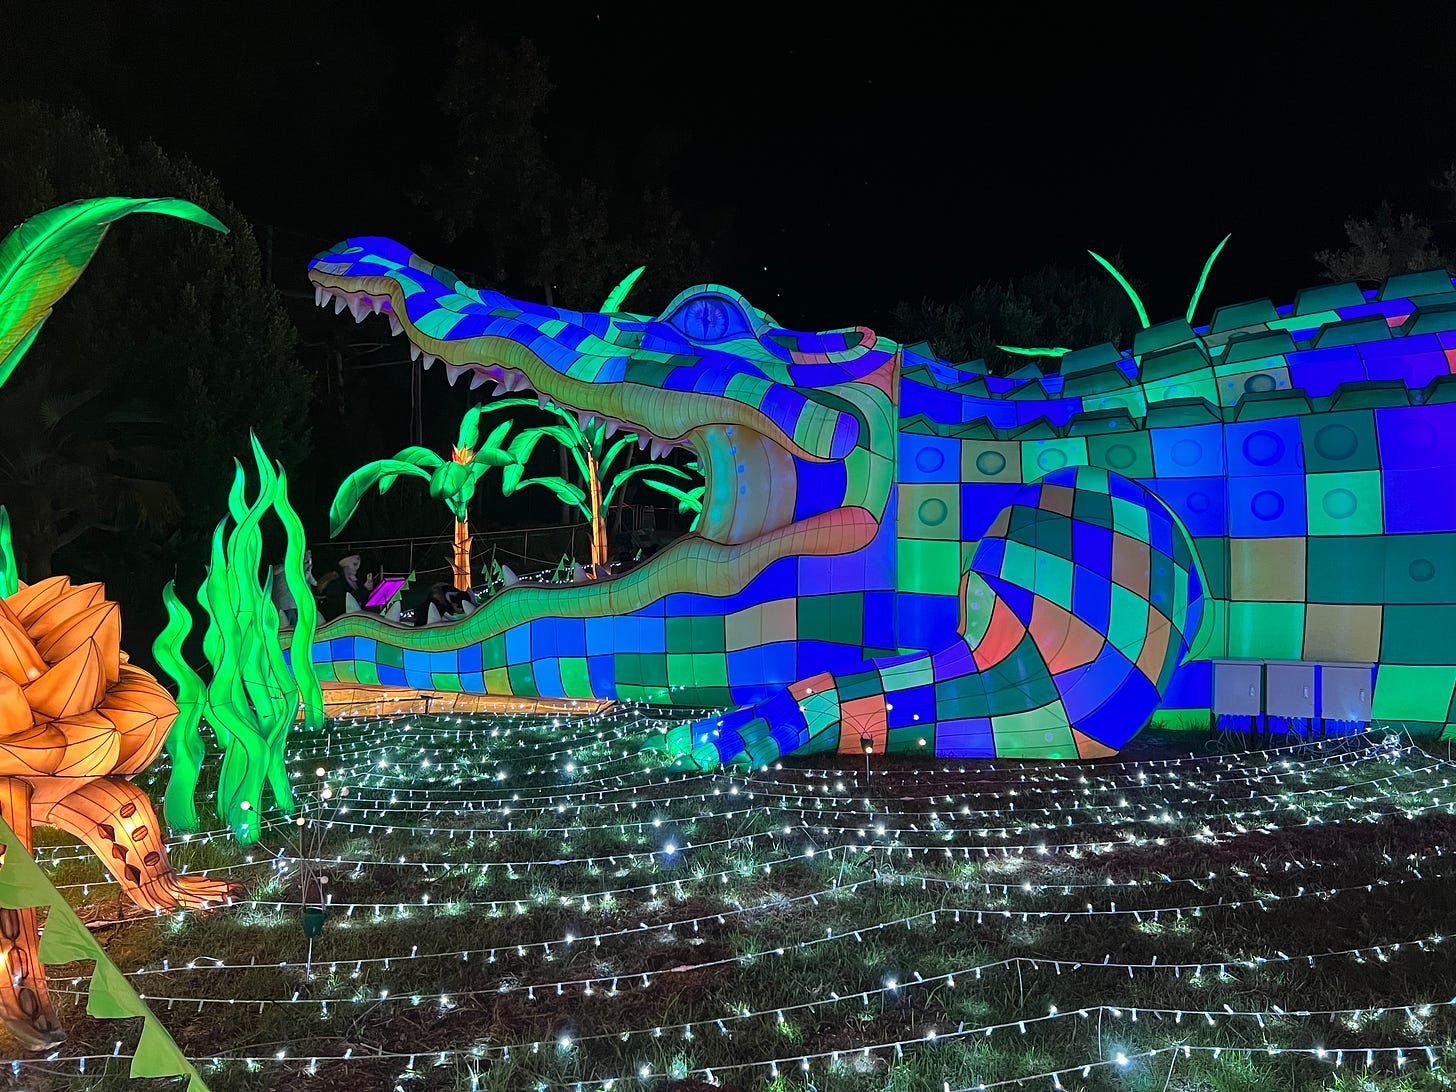 a giant lit up alligator with it's mouth wide open. The field is littered with rope lights and scultures lit up to look like underwater flora.